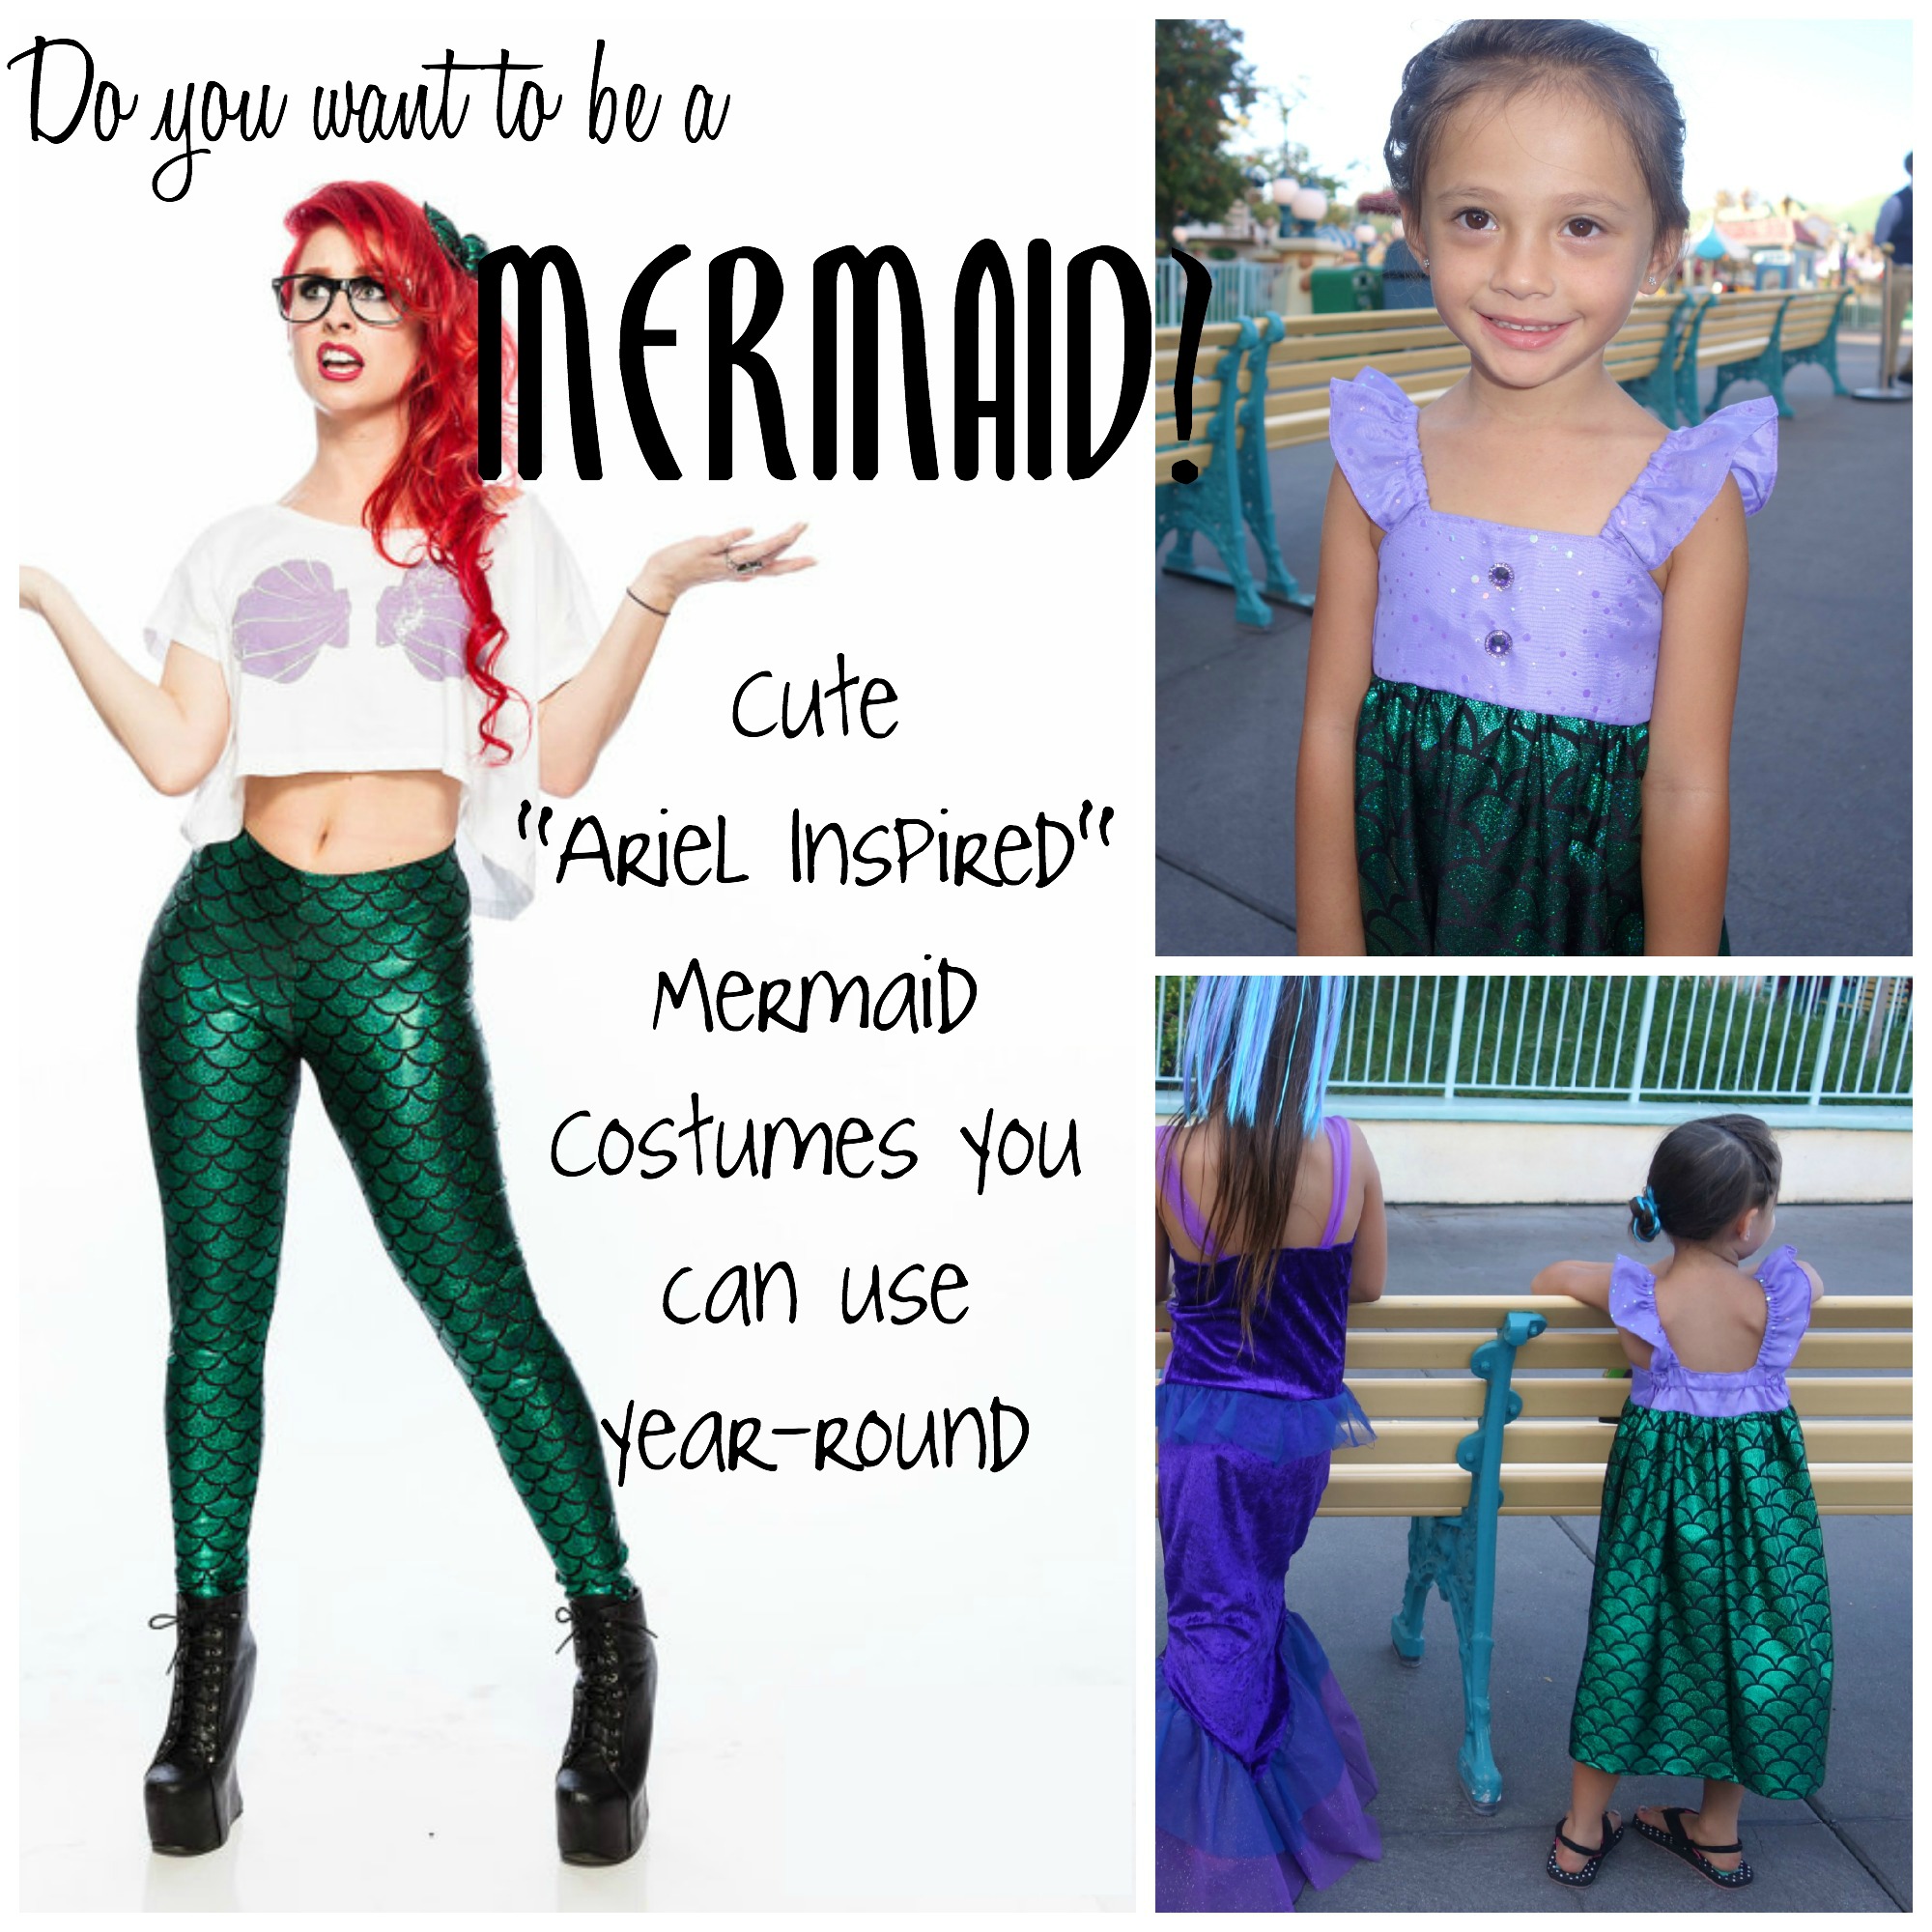 Mermaid Costumes – Not Just for Halloween | Livin' the Mommy Life